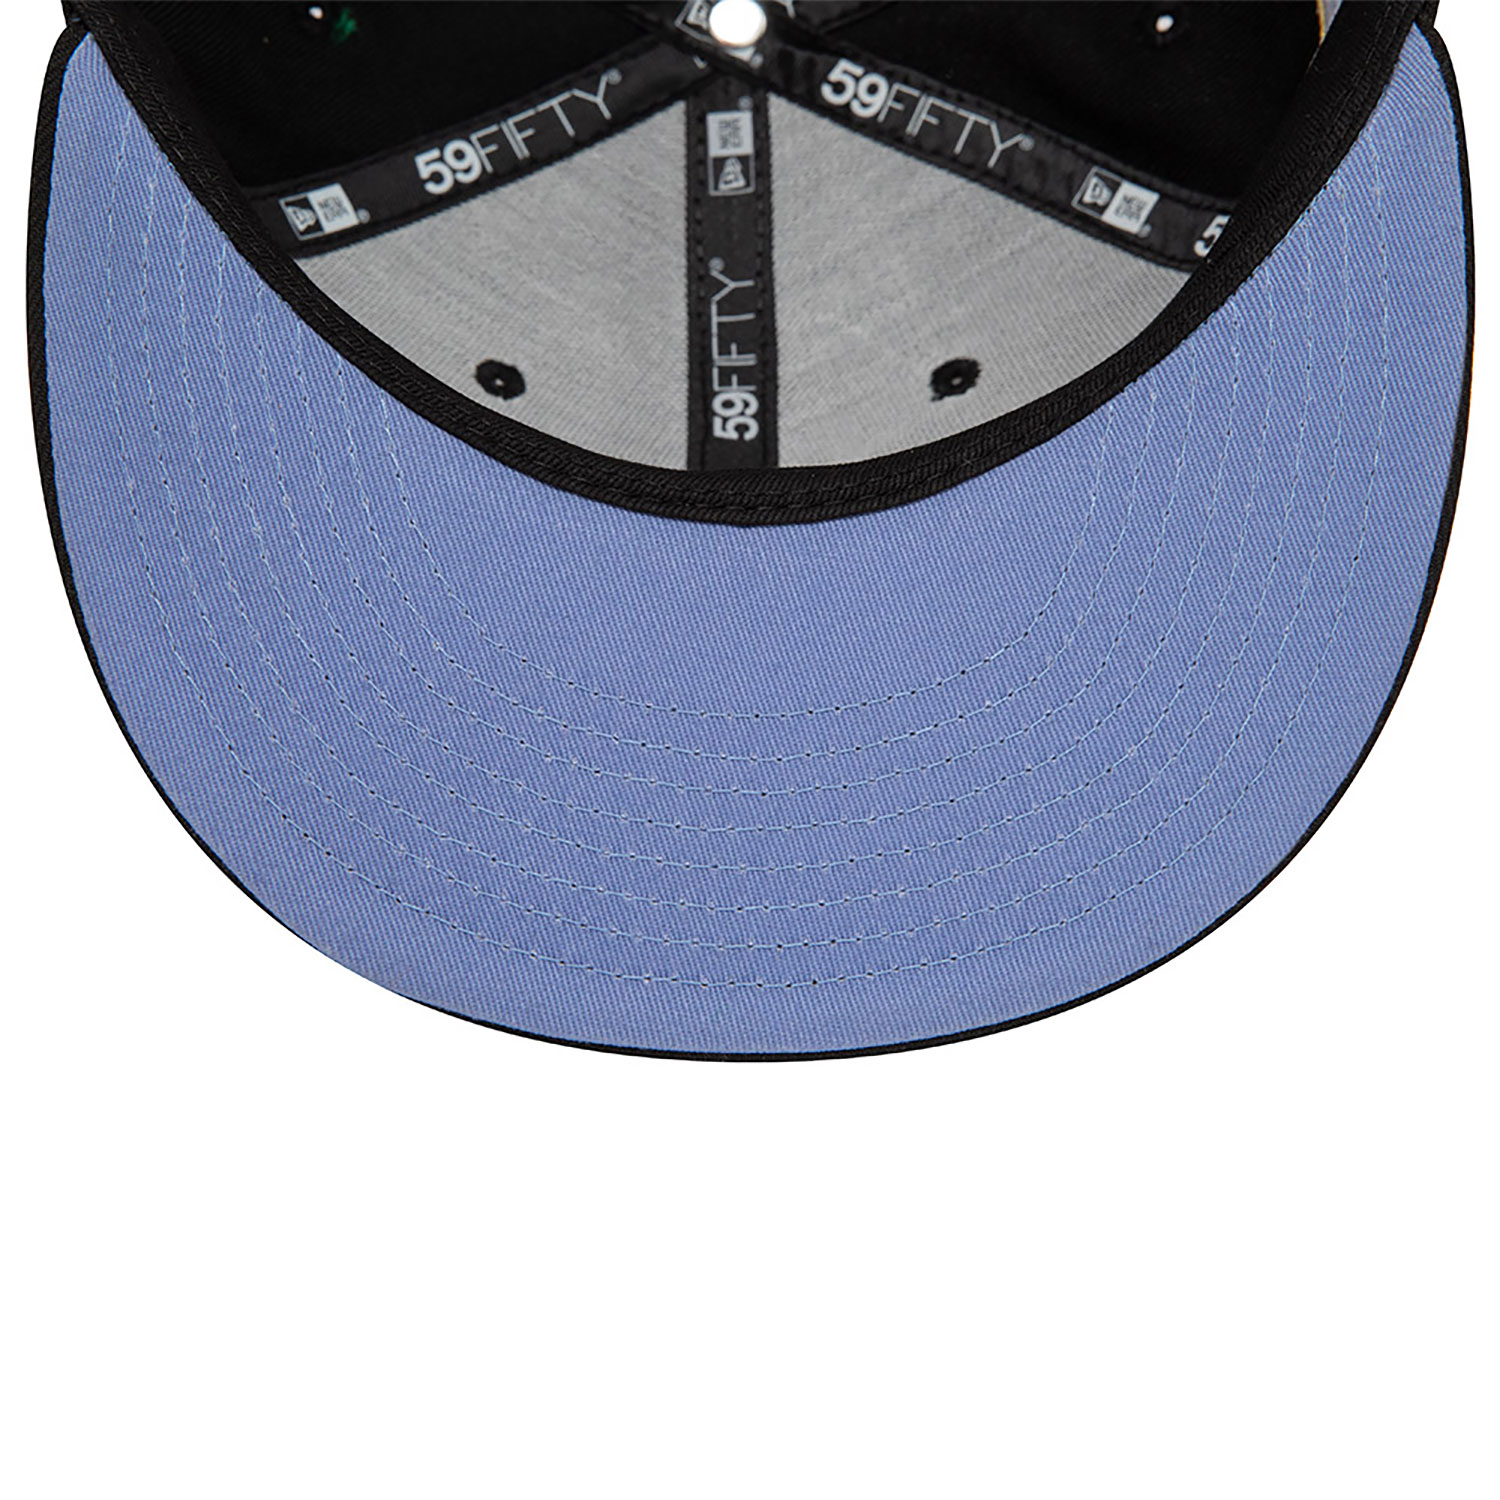 LA Dodgers Style Activist Black 59FIFTY Fitted Cap